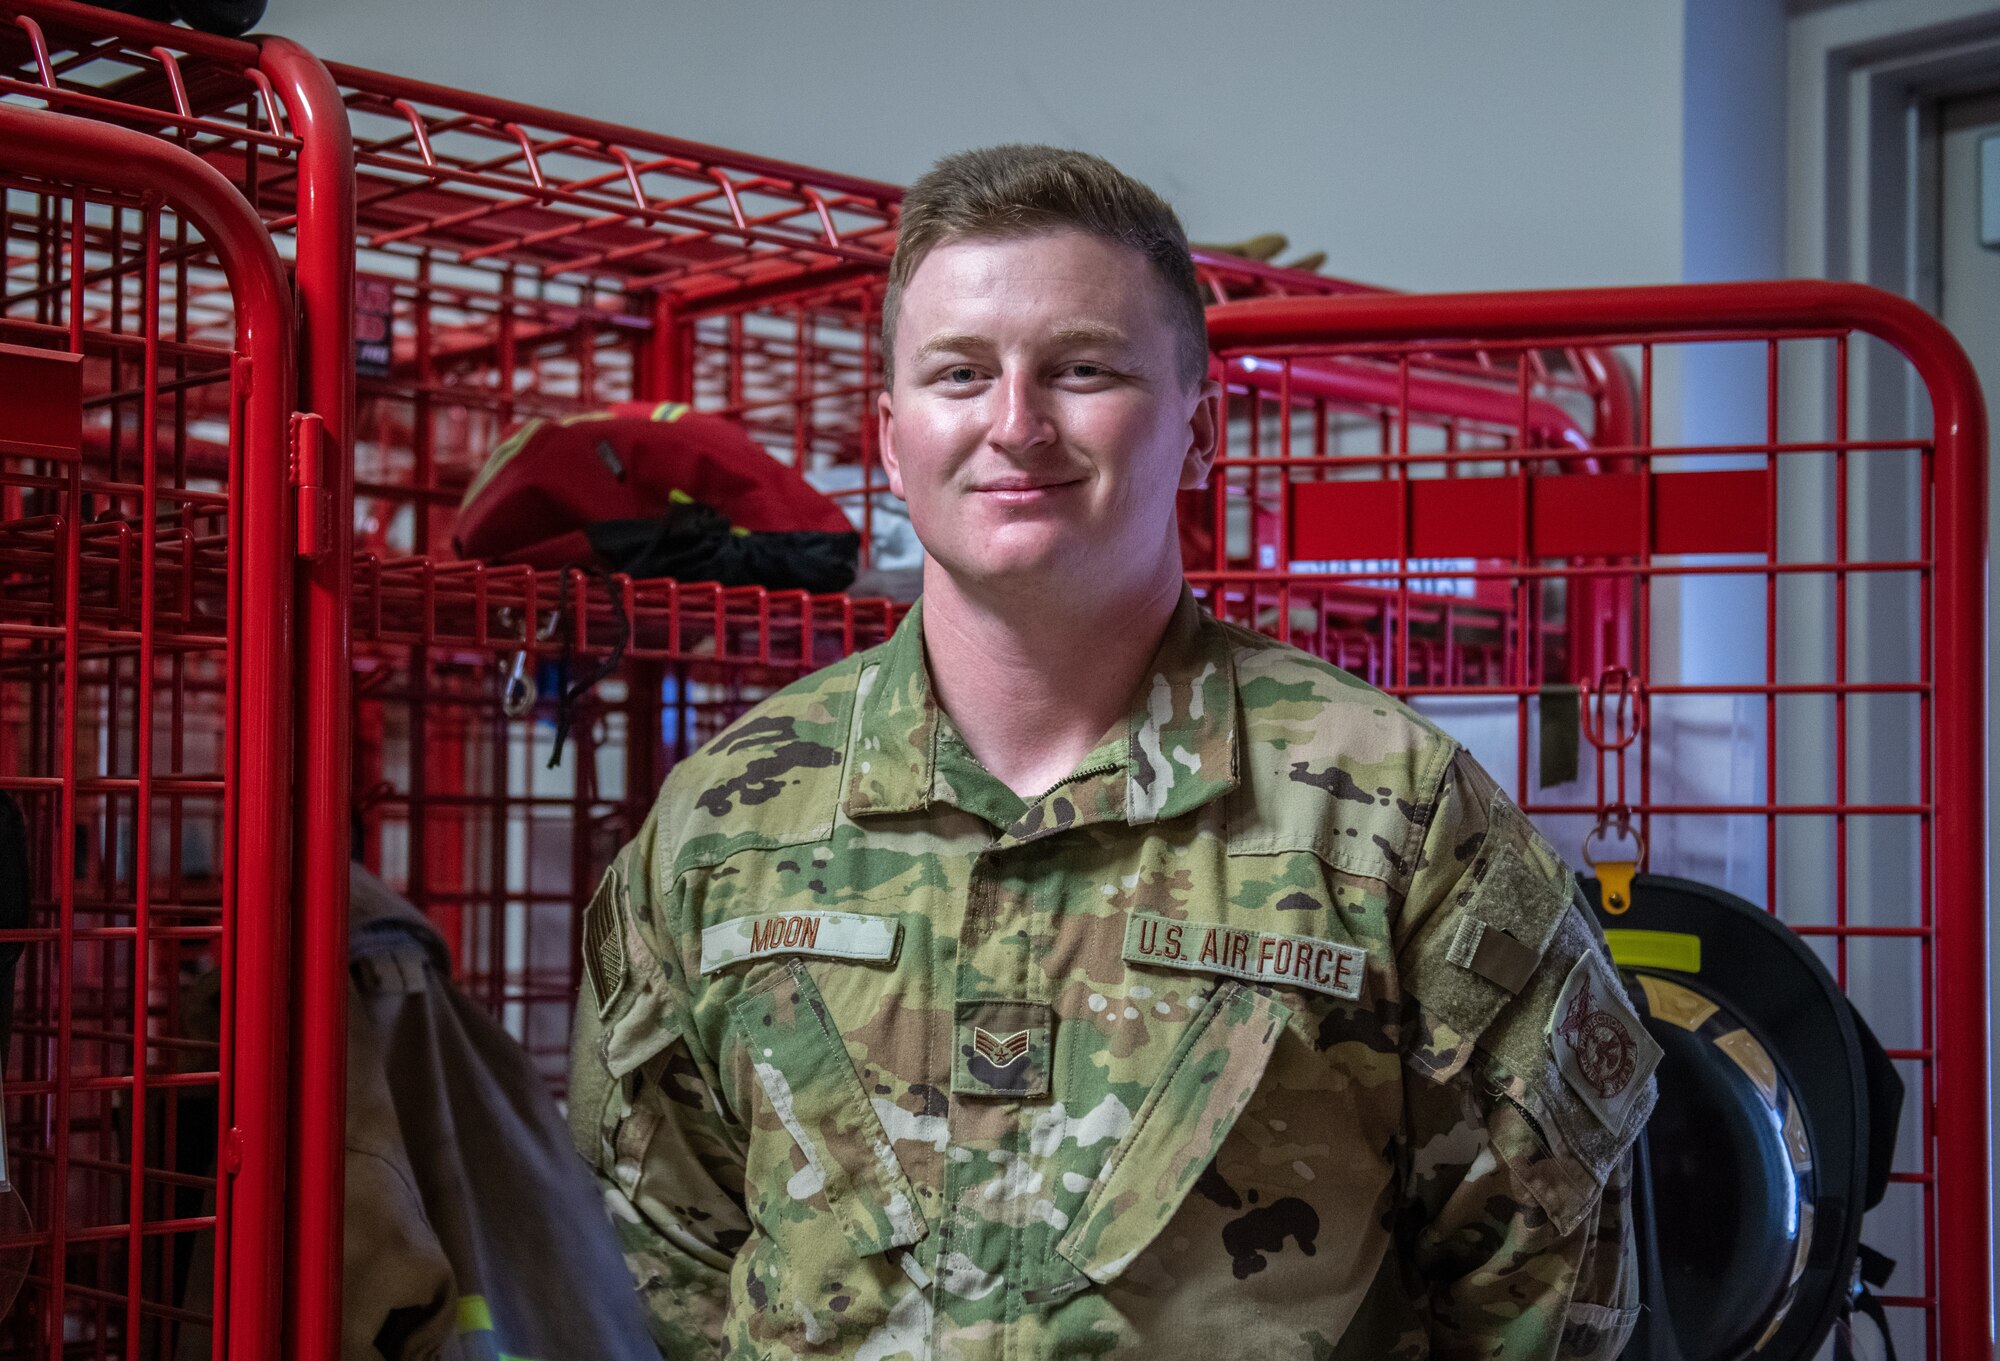 U.S. Air Force Senior Airman Joel Moon, firefighter with the 419th Civil Engineer Squadron, poses for a photo at Hill Air Force Base, Utah on Oct 3, 2021.